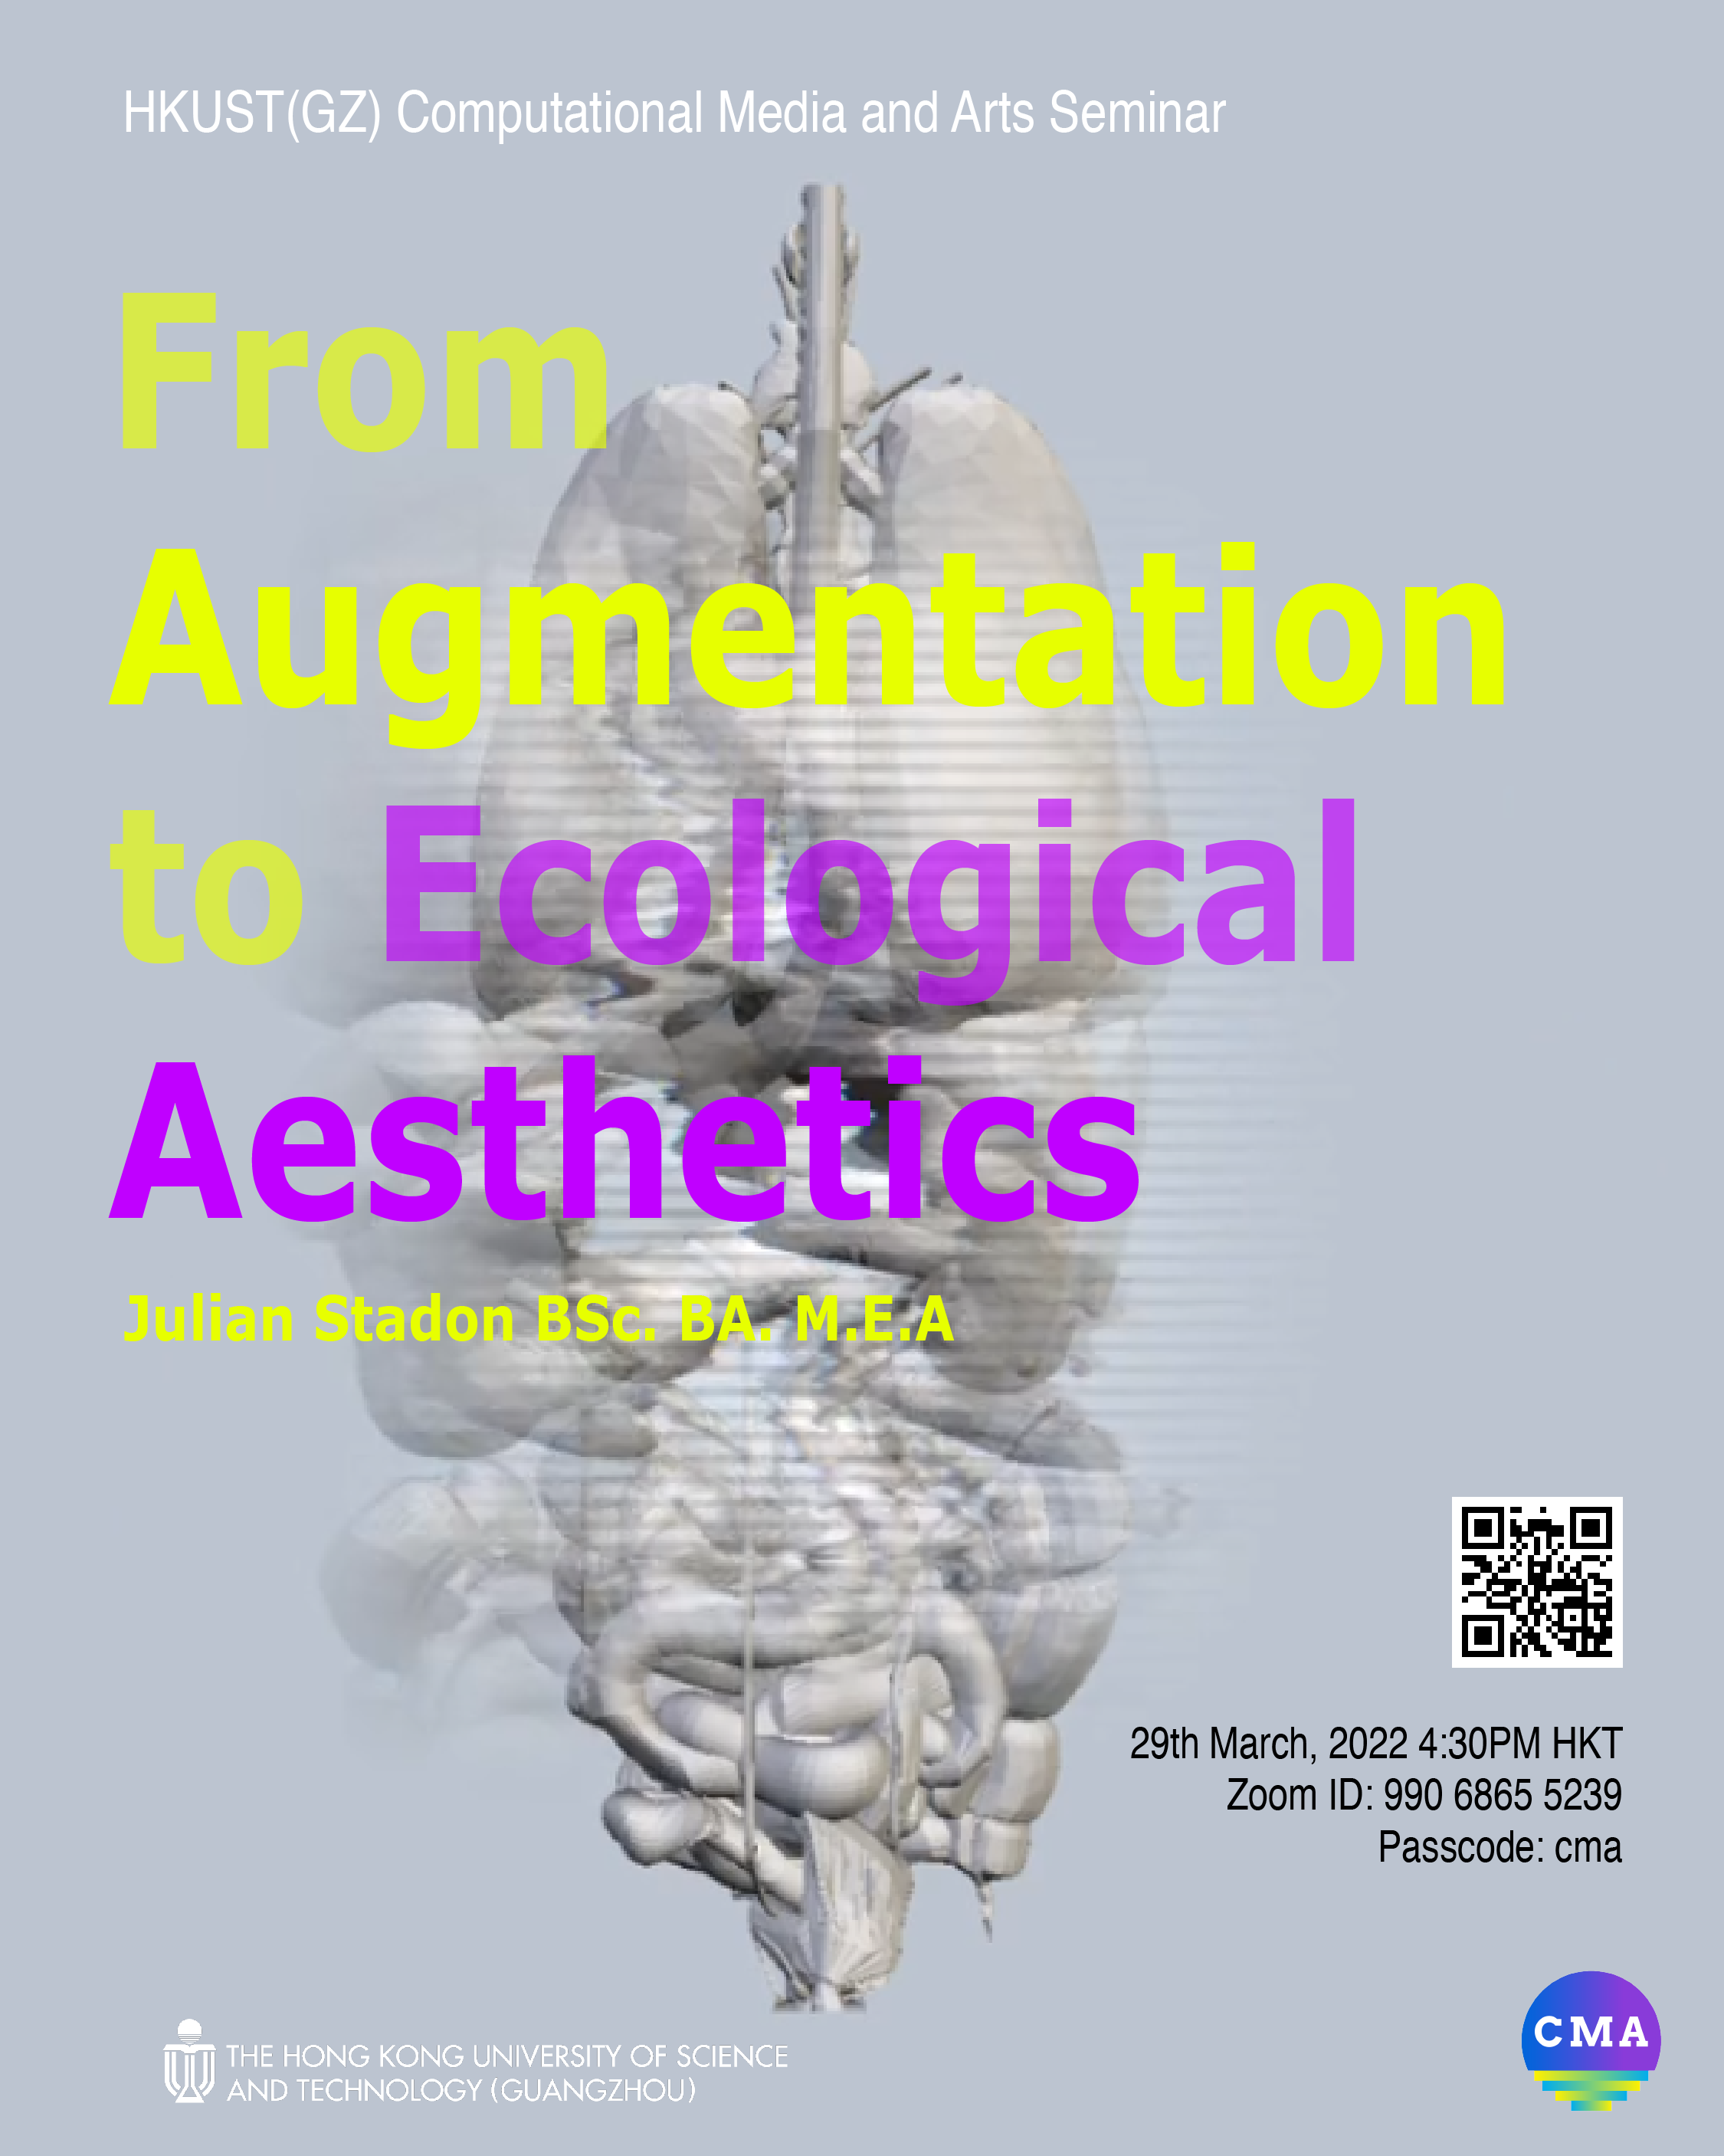 From Augmentation to Ecological Aesthetics